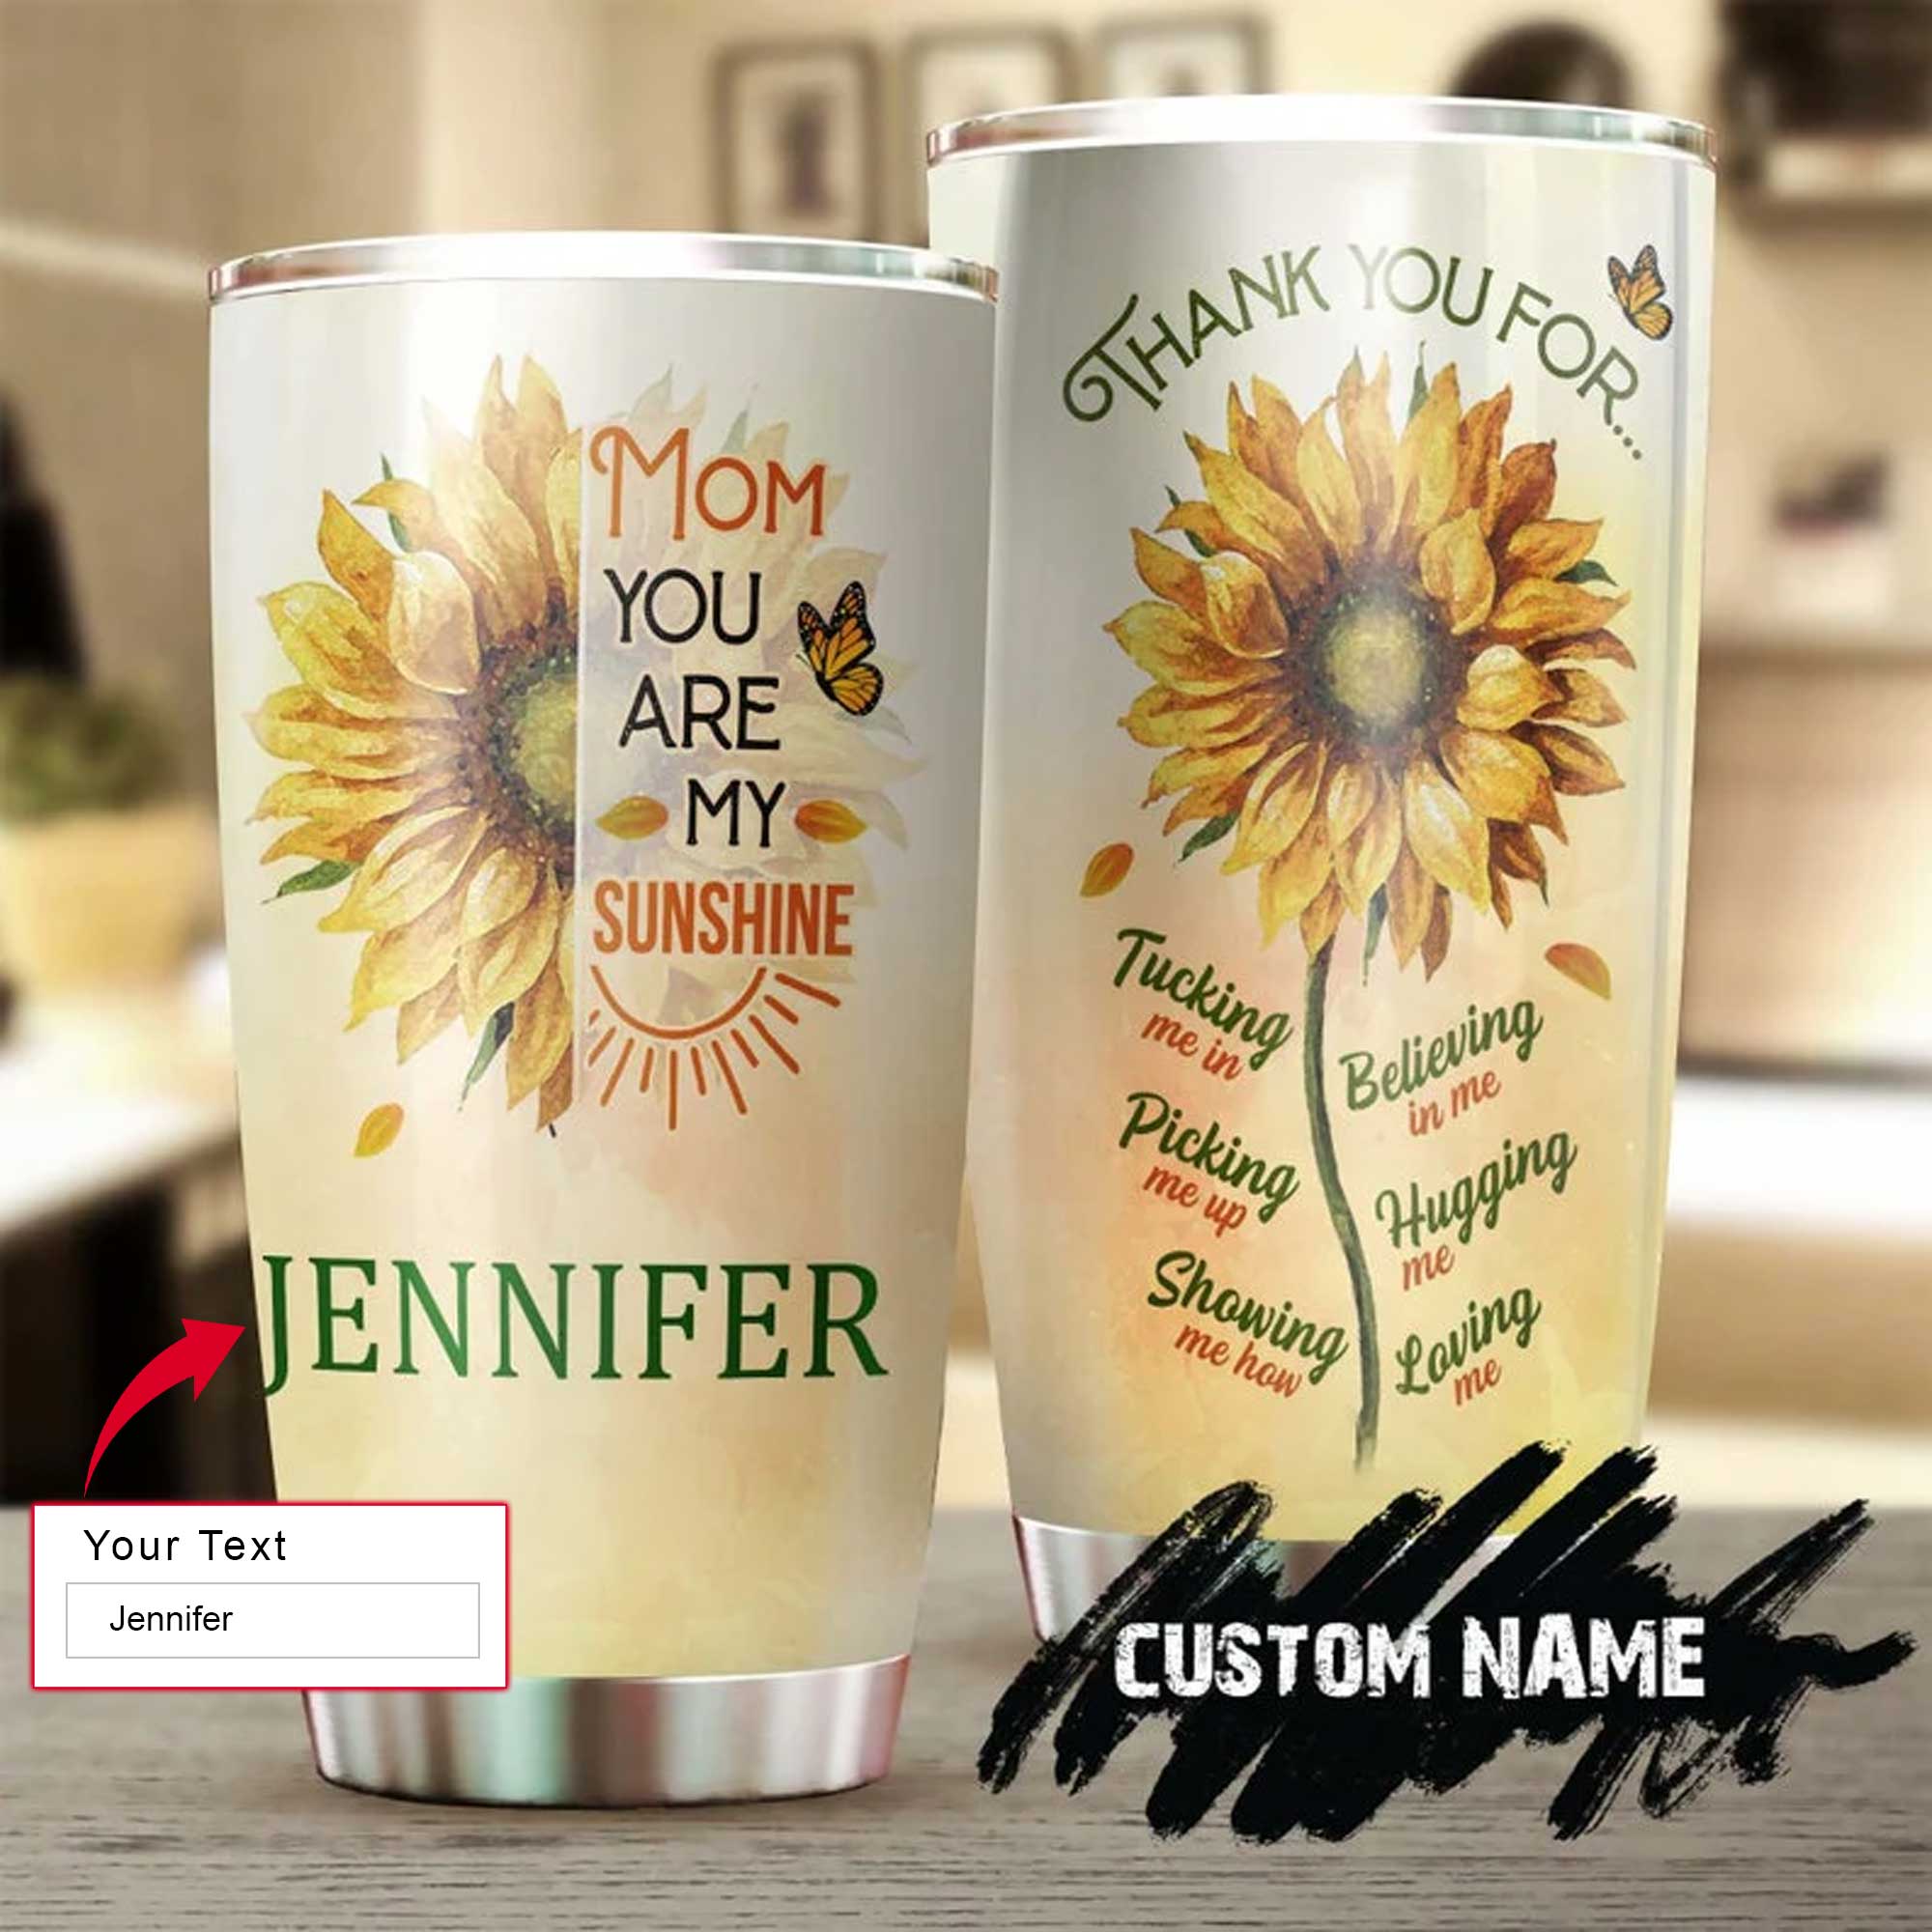 Sunflower Personalized Mother's Day Gift Tumbler -Custom Gift For Mother's Day, Presents For Mom -Mom You Are My Sunshine Thanks For Loving Me Tumbler